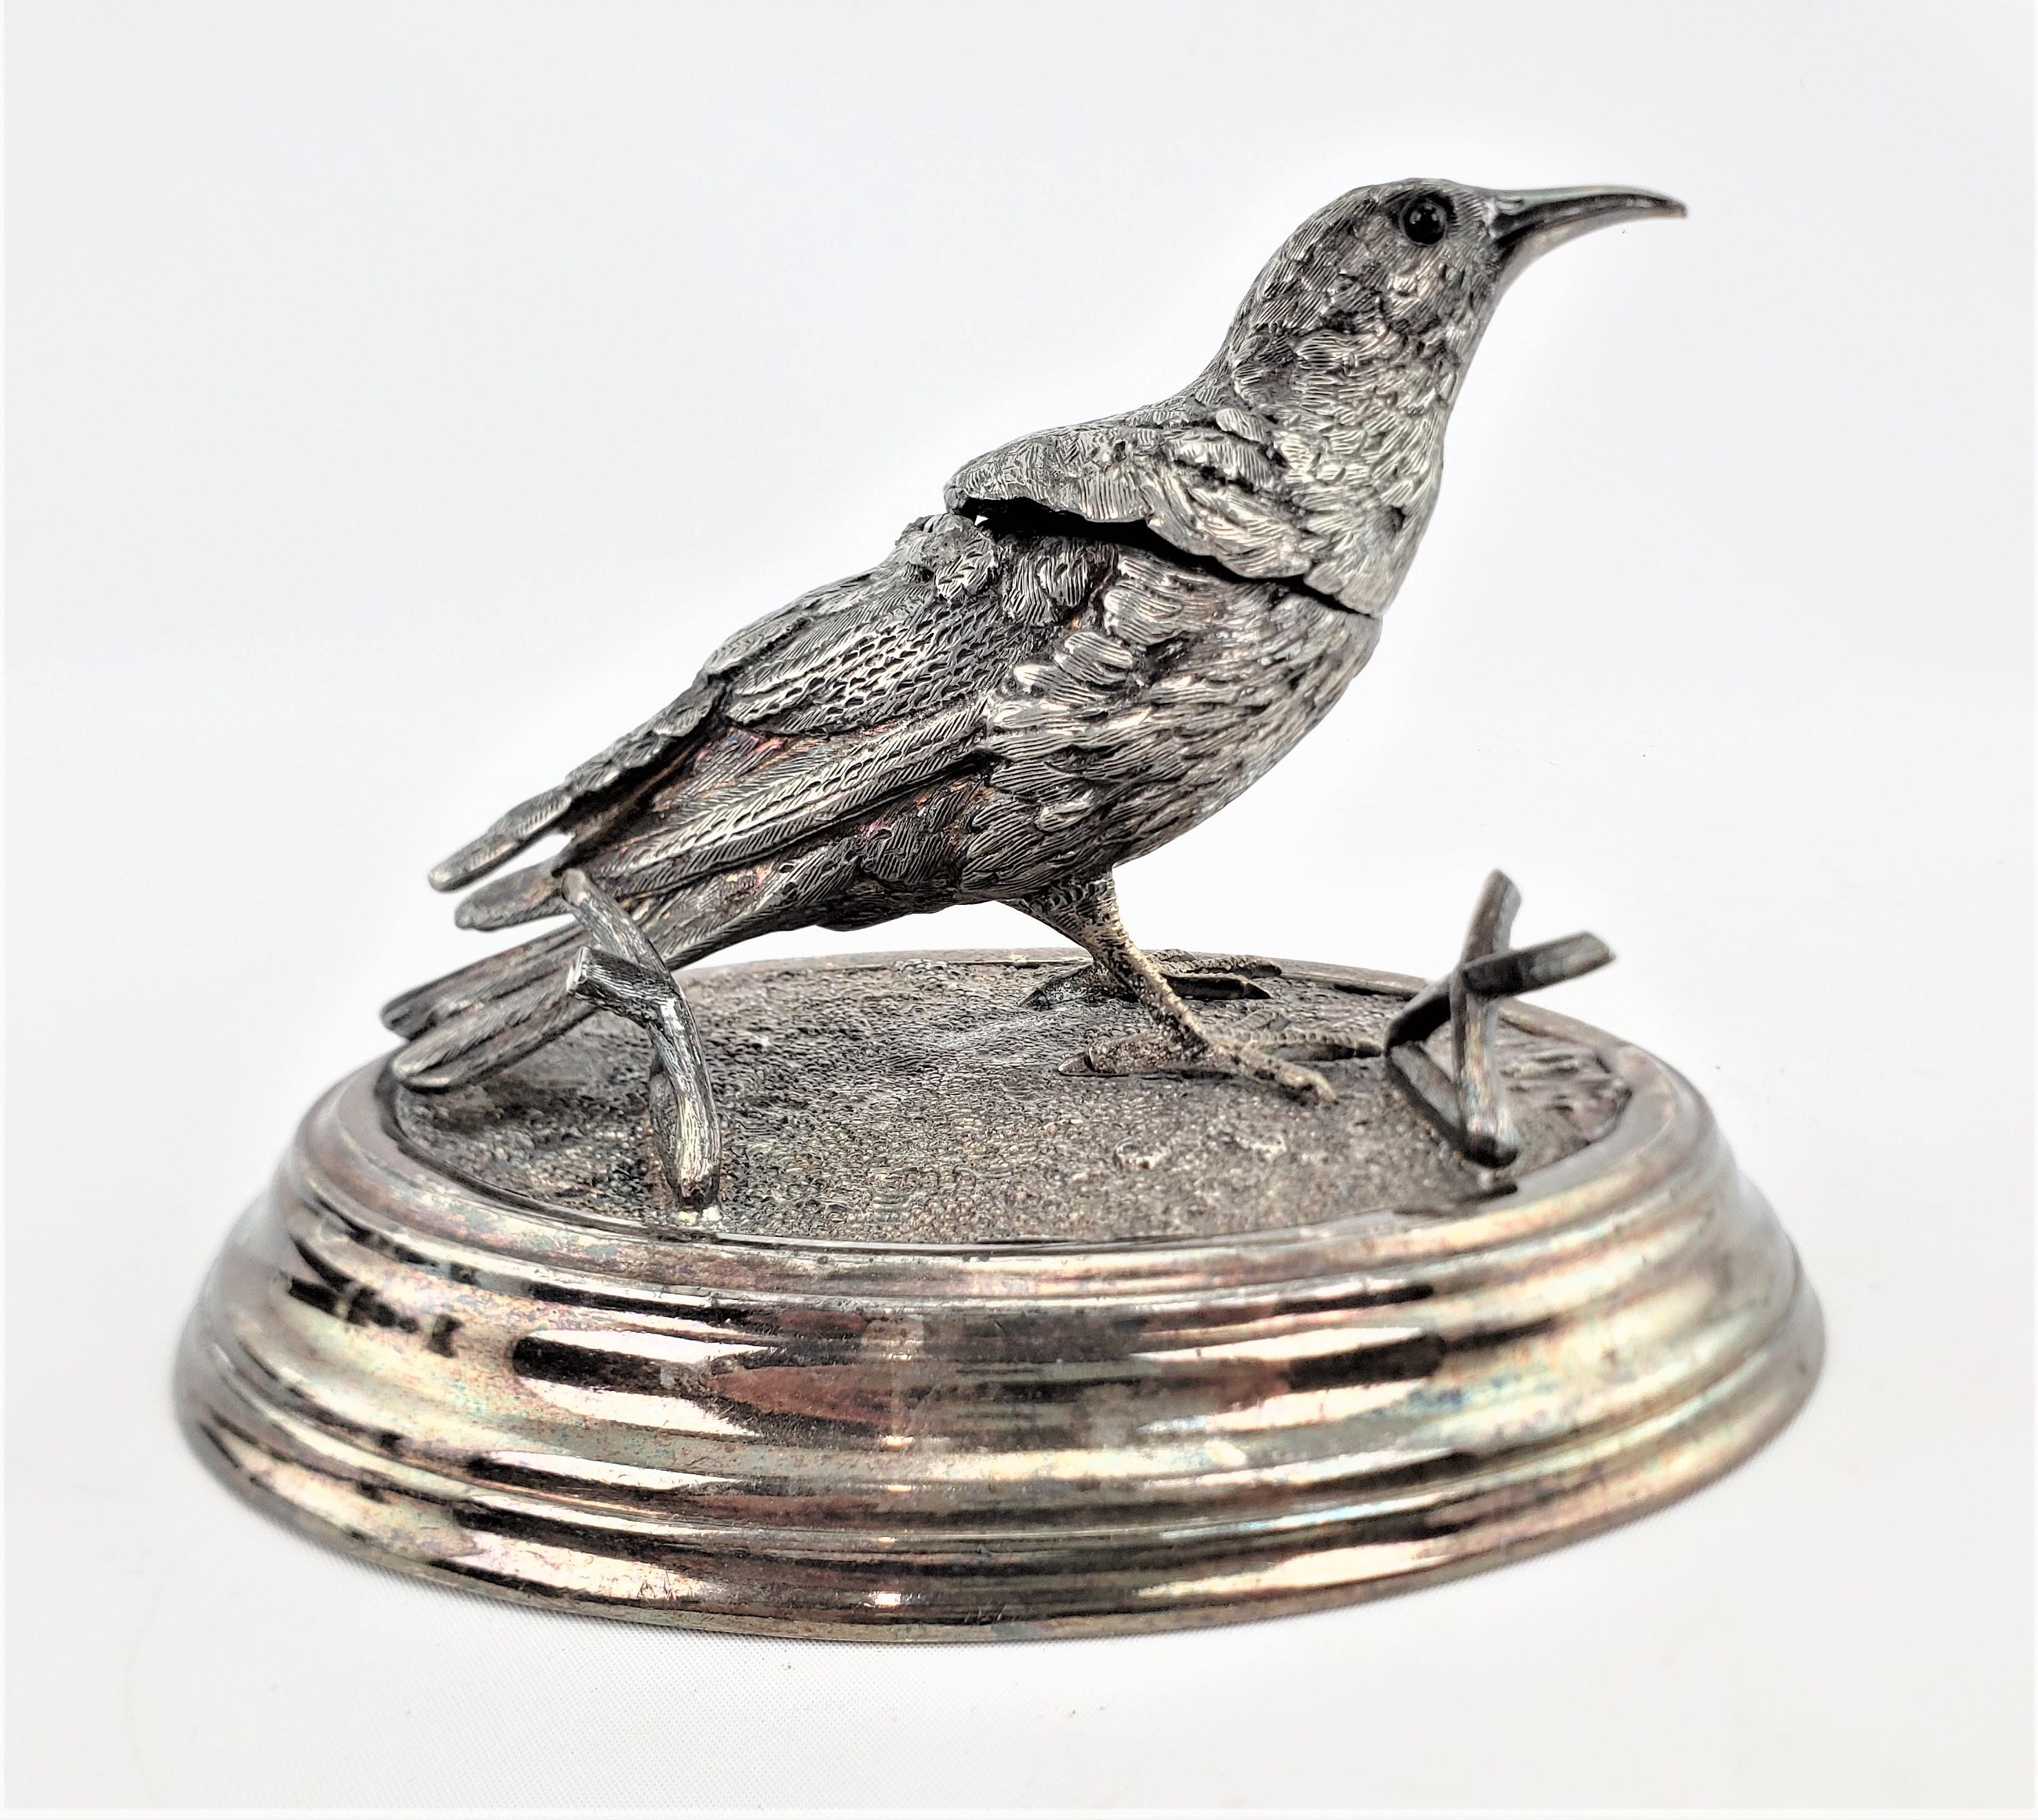 This antique silver plated figural inkwell was made by the renowned James Deakin & Sons of England in approximately 1880 in the period Victorian style. The inkwell or sculpture depicts a standing bird, presumably a raven, with some crossed broken